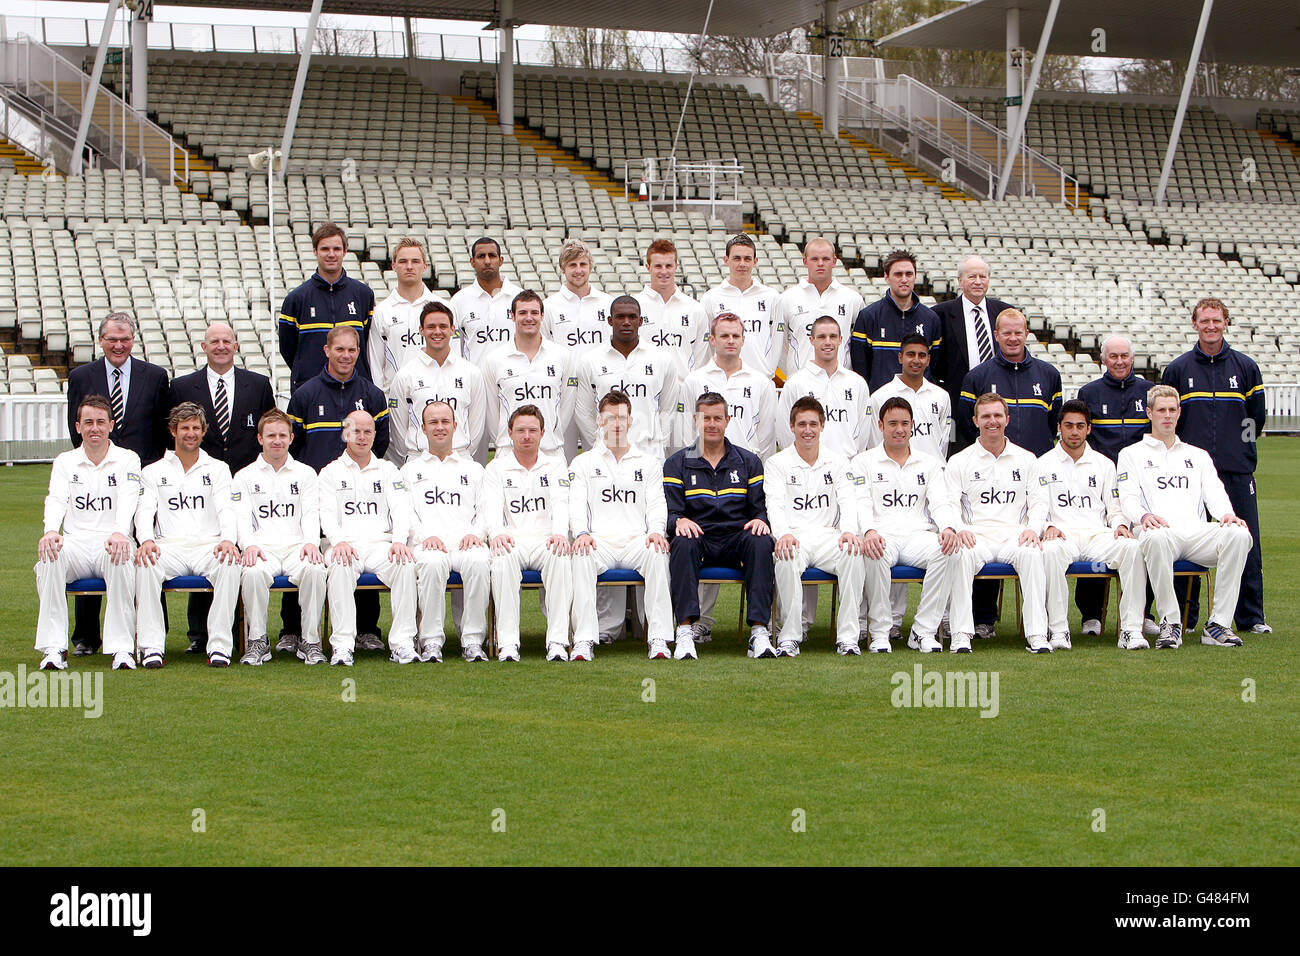 Warwickshire Team Group (Back Row L-R) Chris Armstrong (Strength and Conditioning Coach), Laurie Evans, Varun Chopra, Thomas Allin, Thomas Milnes, Maurice Holmes, Chris Metters, Stuart Keyb (Team Analyst) und David Wainwright (1. Elf-Torschütze) (Middle Row L-R) Norman Gascoigne (Chairman), Colin Povey (Chief Executive), Gerhard Mostert (Physiotherapeut), Andrew Miller, Keith Barker, will Porterfield, Richard Johnson, Ateeq Javid, Graeme Welch (Bowling Coach), Neal Abberley (Development Coach), Dougie Brown (Assistant Coach) (Front Row L-R) Rikki Clarke, Ant Botha, Ian Westwood, Tim Ambrose, Stockfoto